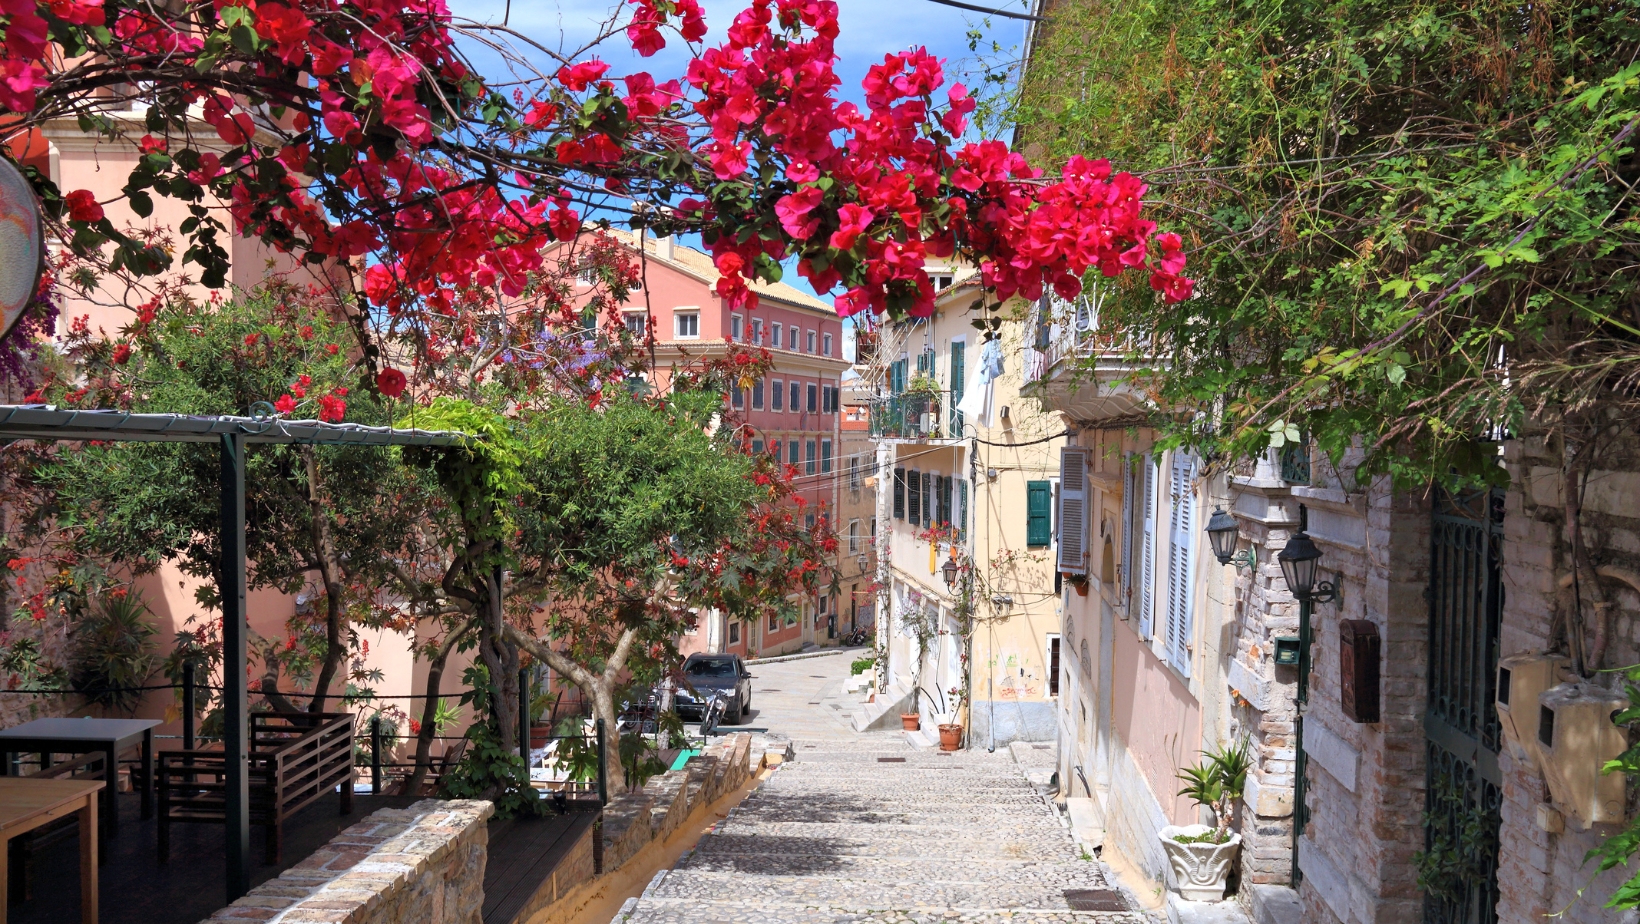 Things to do and see in Corfu